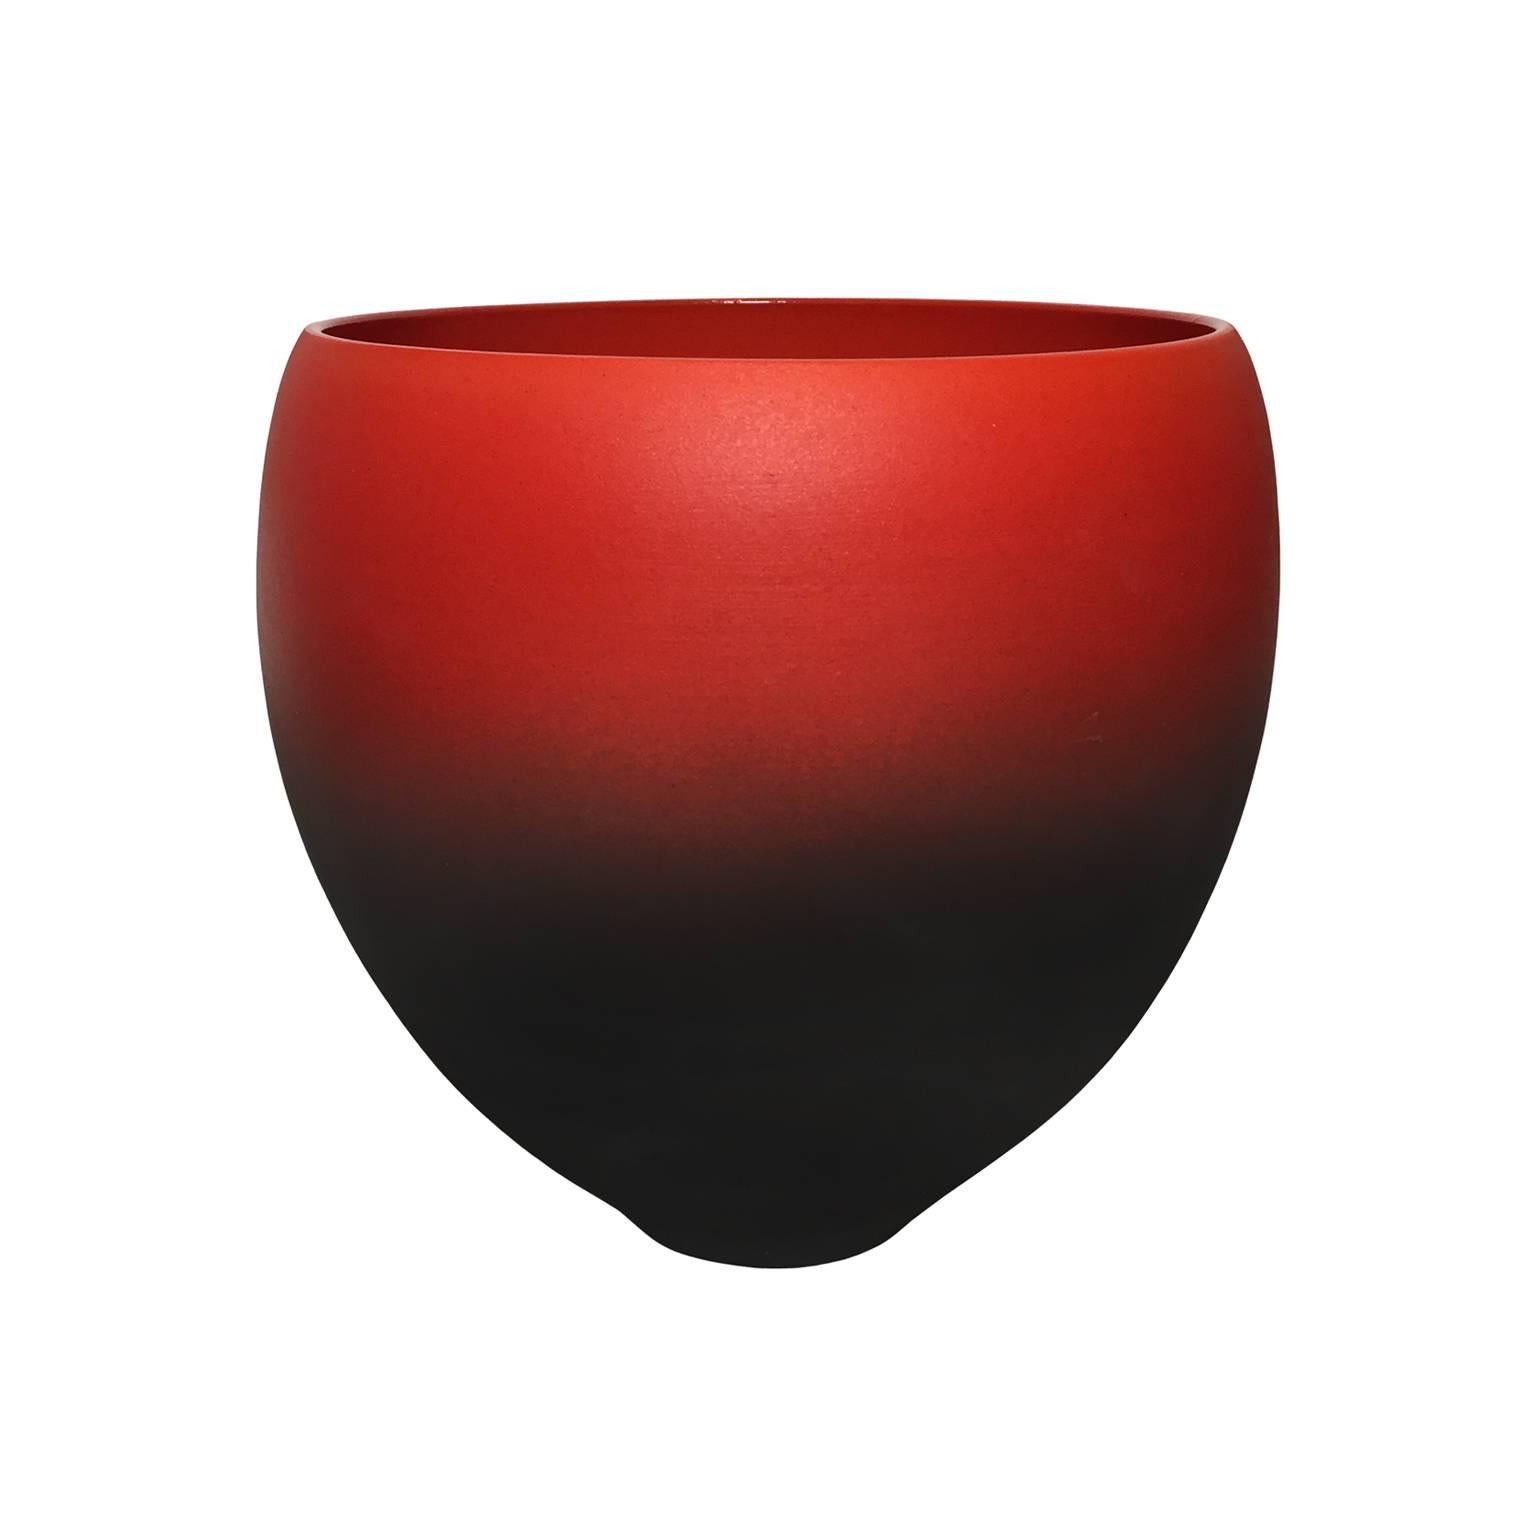 Red Ombre Matte Ceramic Bowl with Red Gloss Glaze Interior by Sandi Fellman